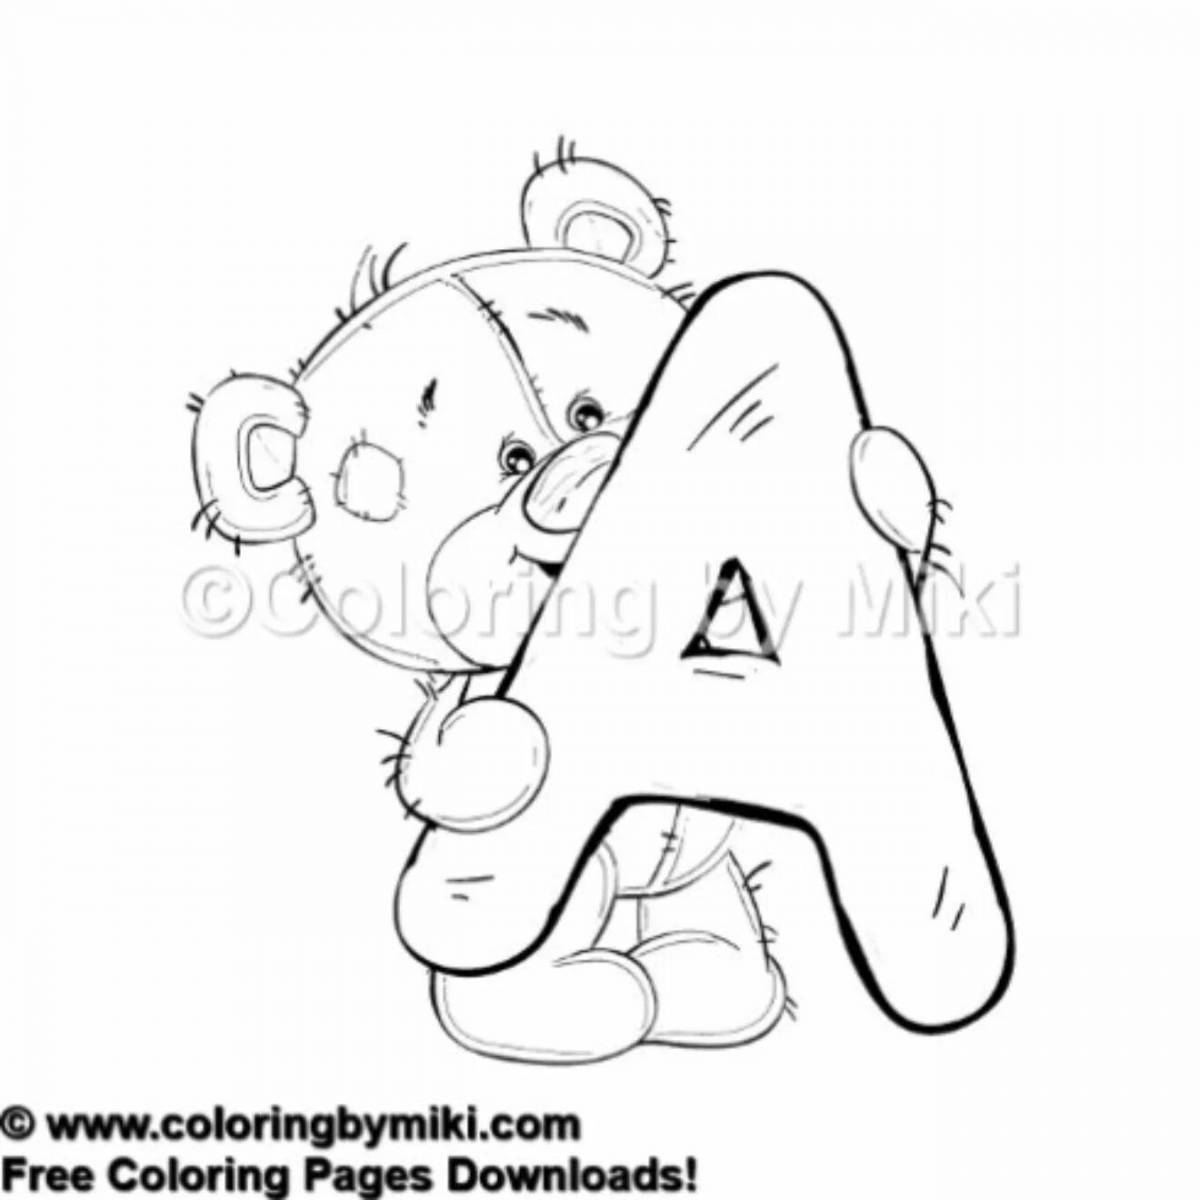 Playful funny alphabet coloring page